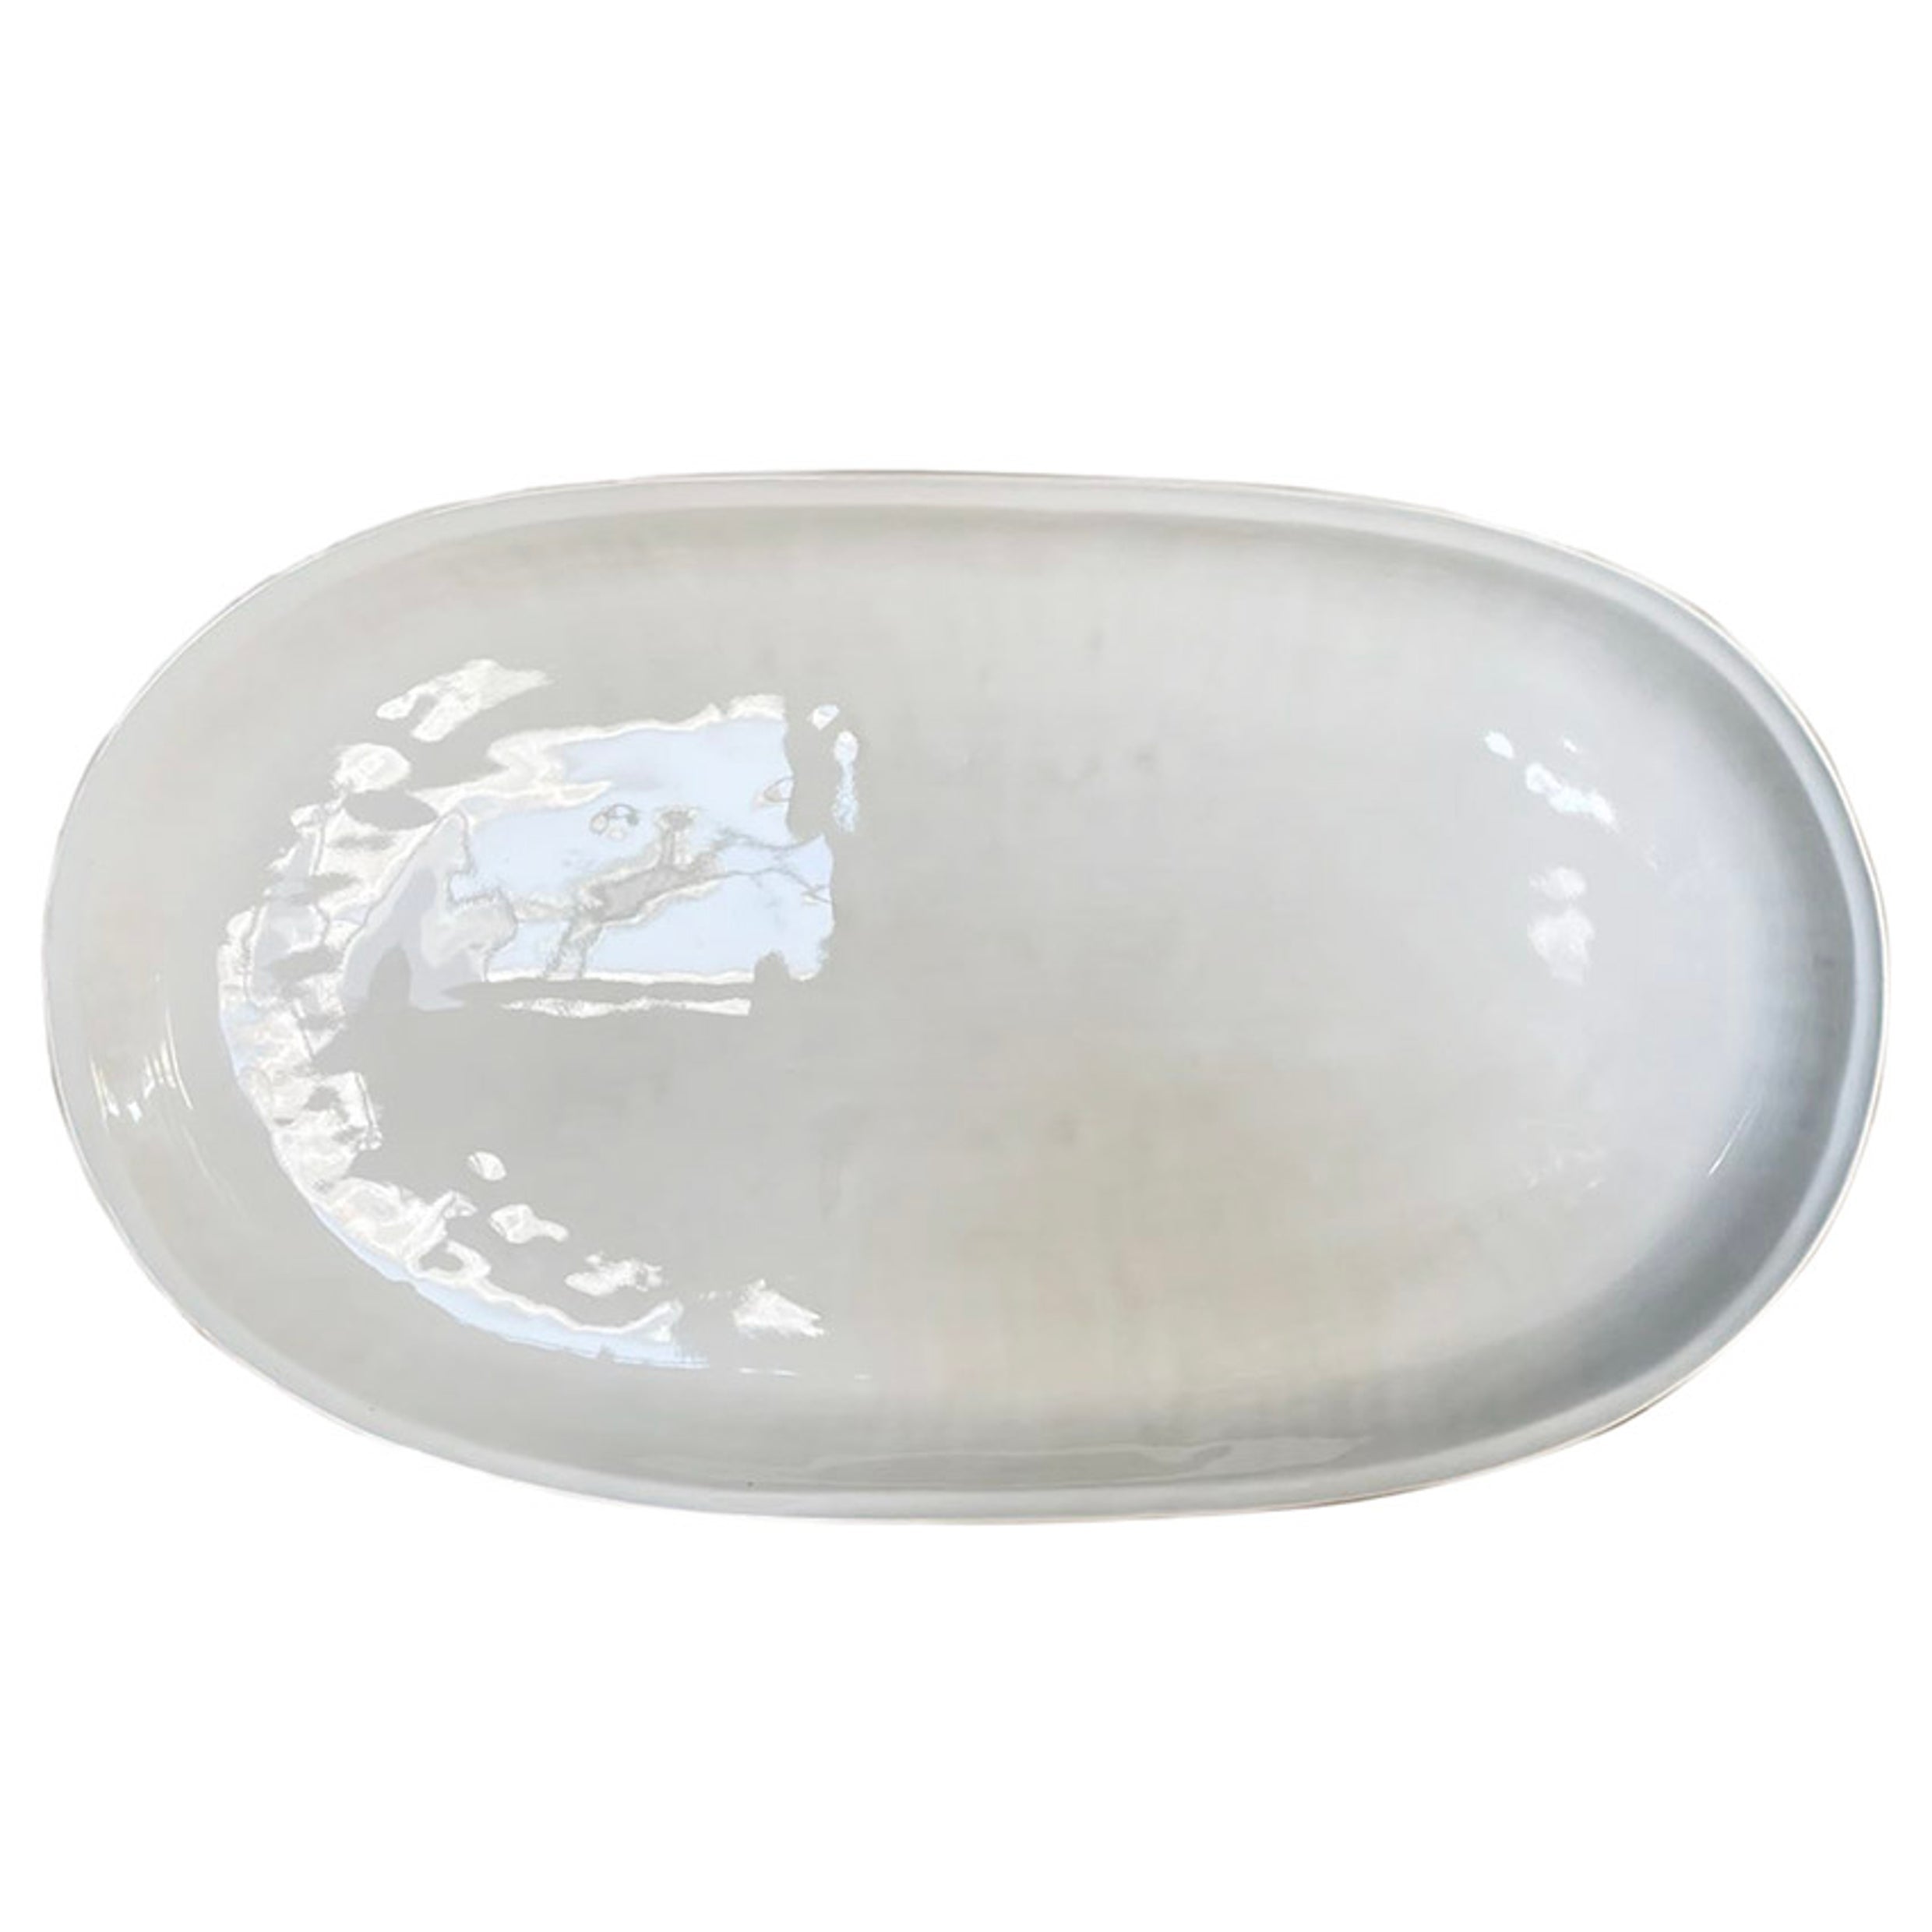 Oval shaped platter in white coloured stoneware